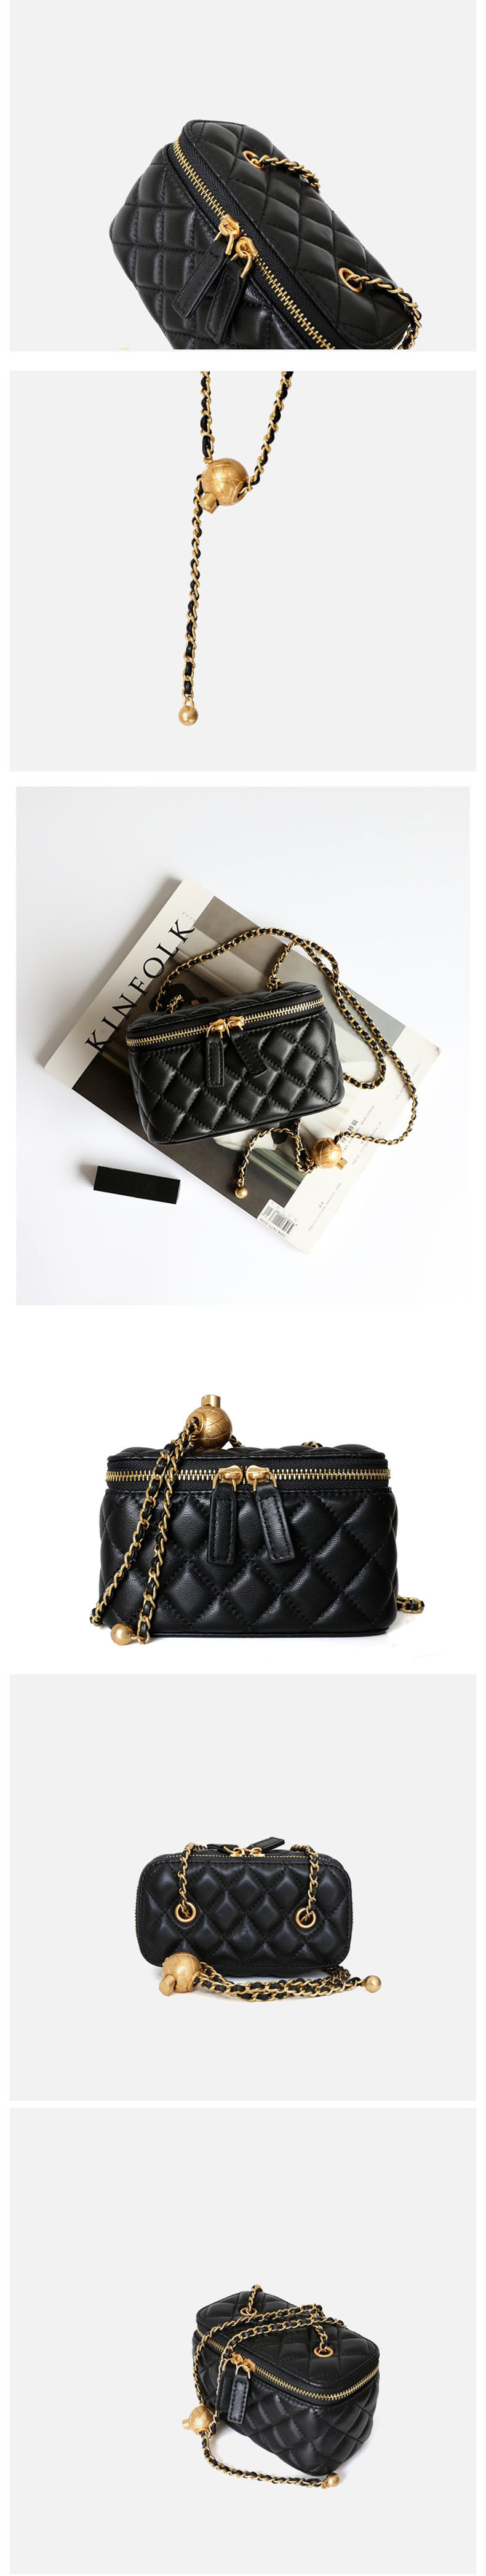 Fragrance Style Sheepskin Leather Small Square Lady Shoulder Bag with Chain